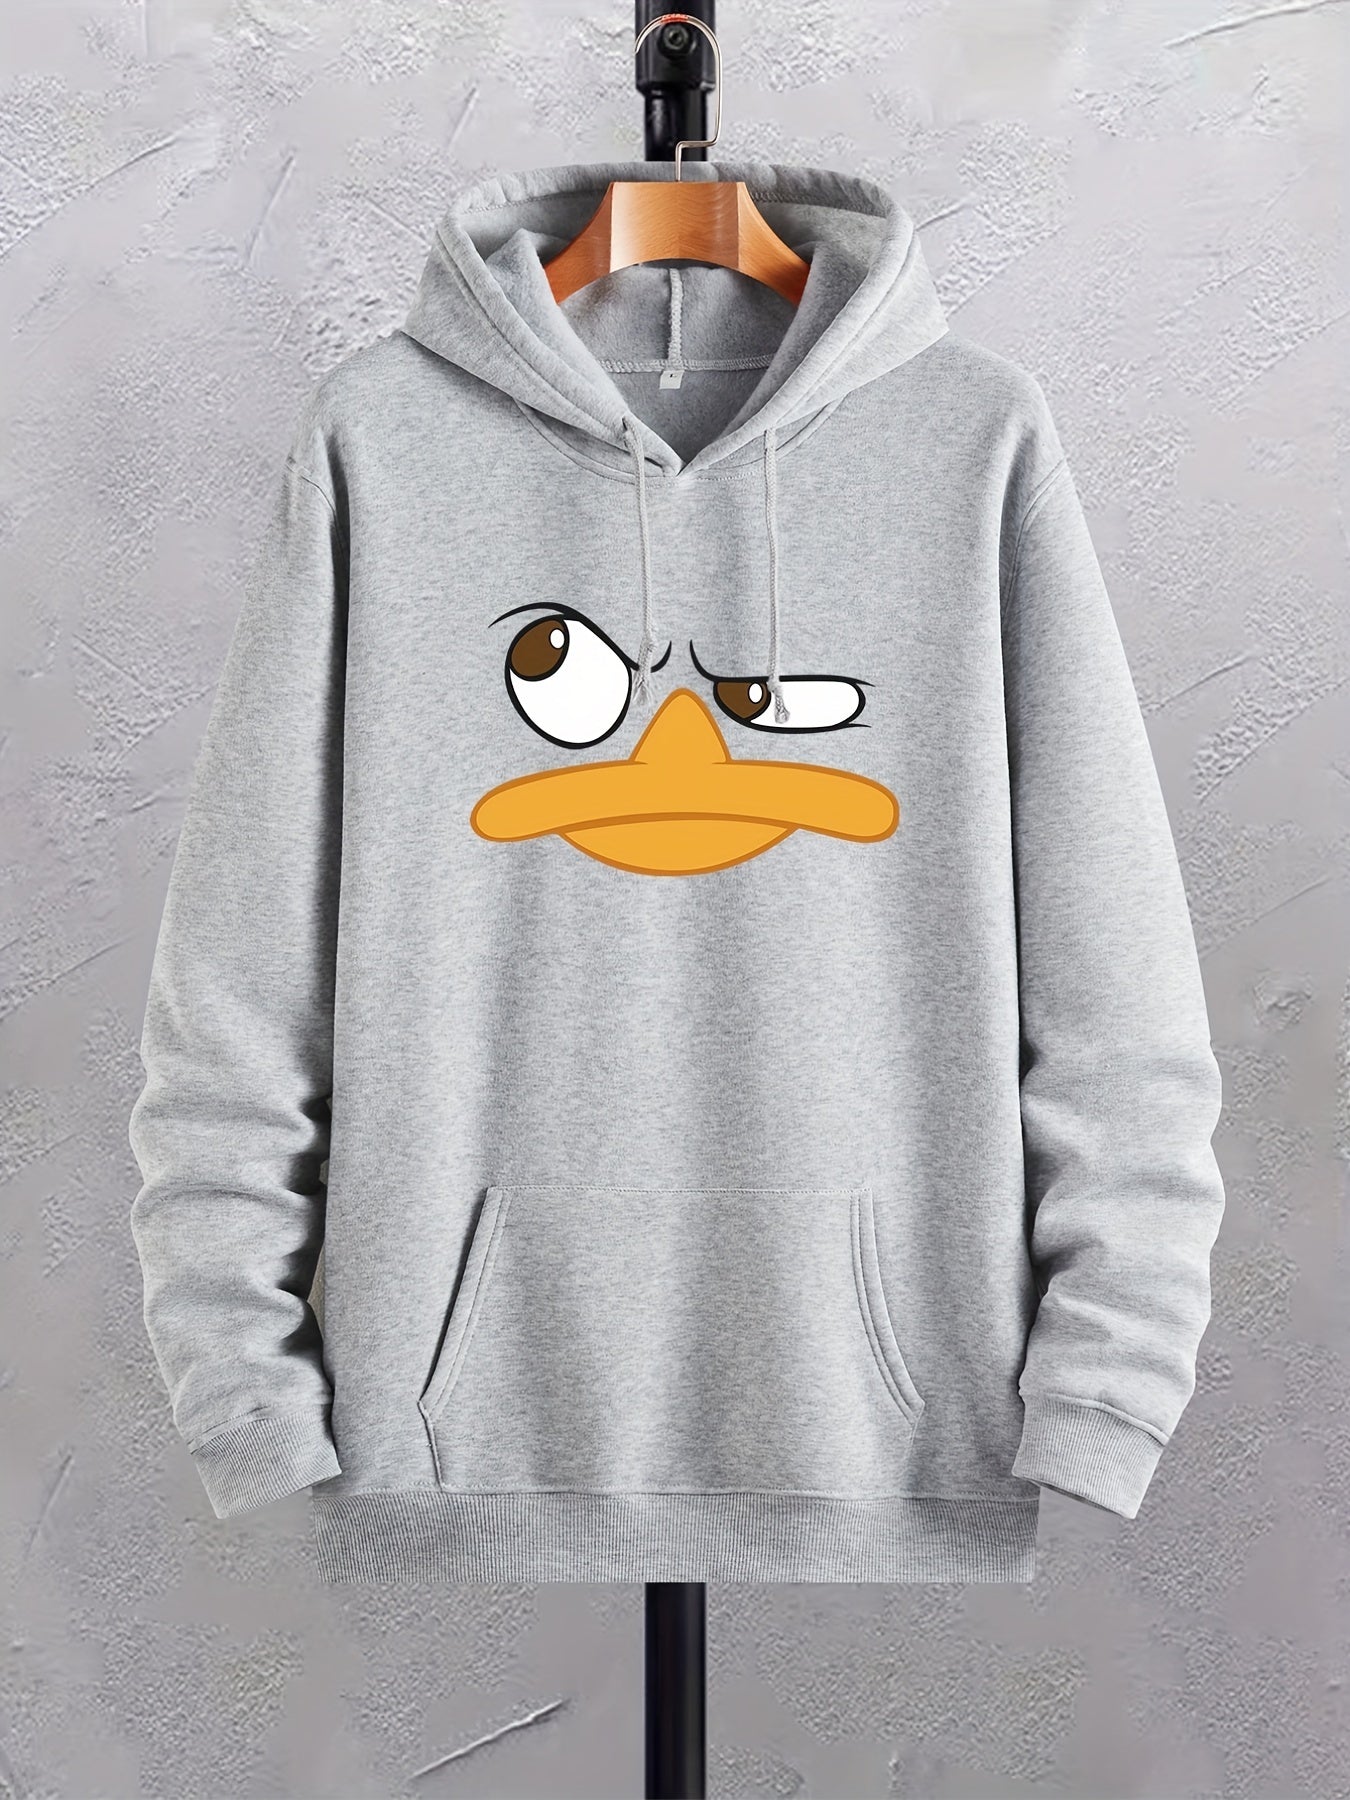 Cartoon Duck Print Hoodies For Men, Graphic Hoodie With Kangaroo Pocket, Comfy Loose Trendy Drawstring Hooded Pullover, Mens Clothing For Autumn Winter